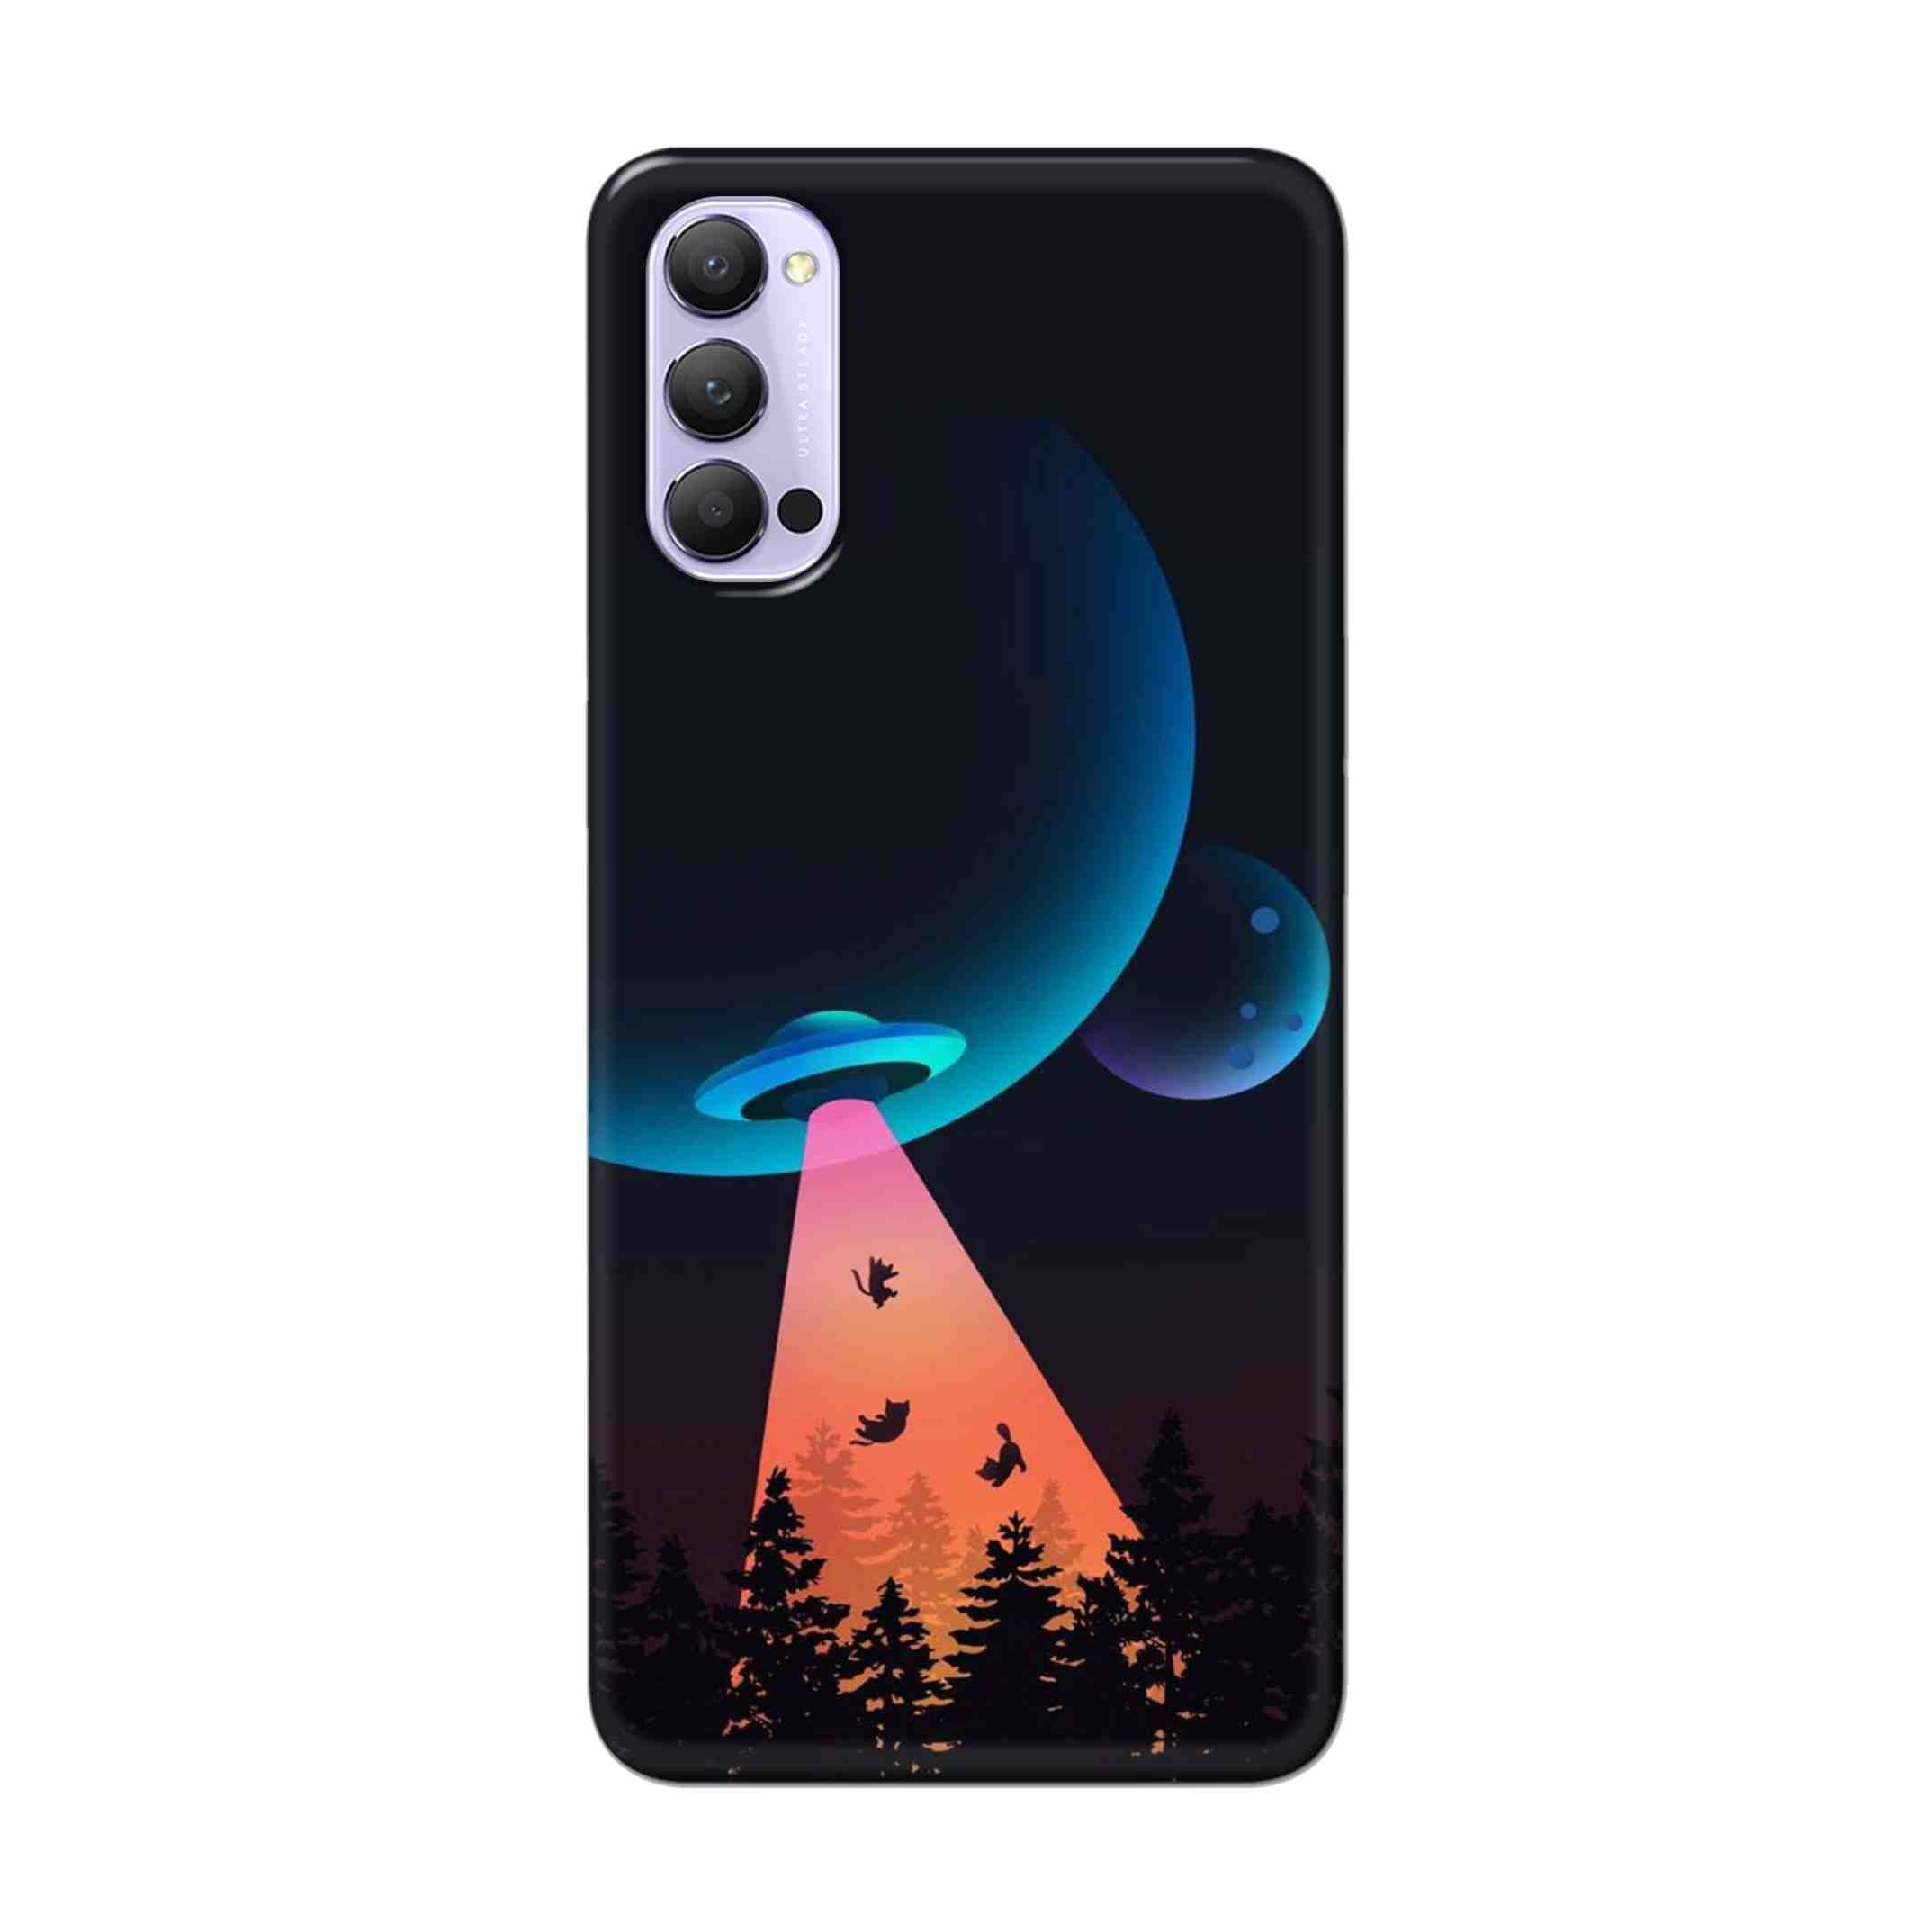 Buy Spaceship Hard Back Mobile Phone Case Cover For Oppo Reno 4 Pro Online